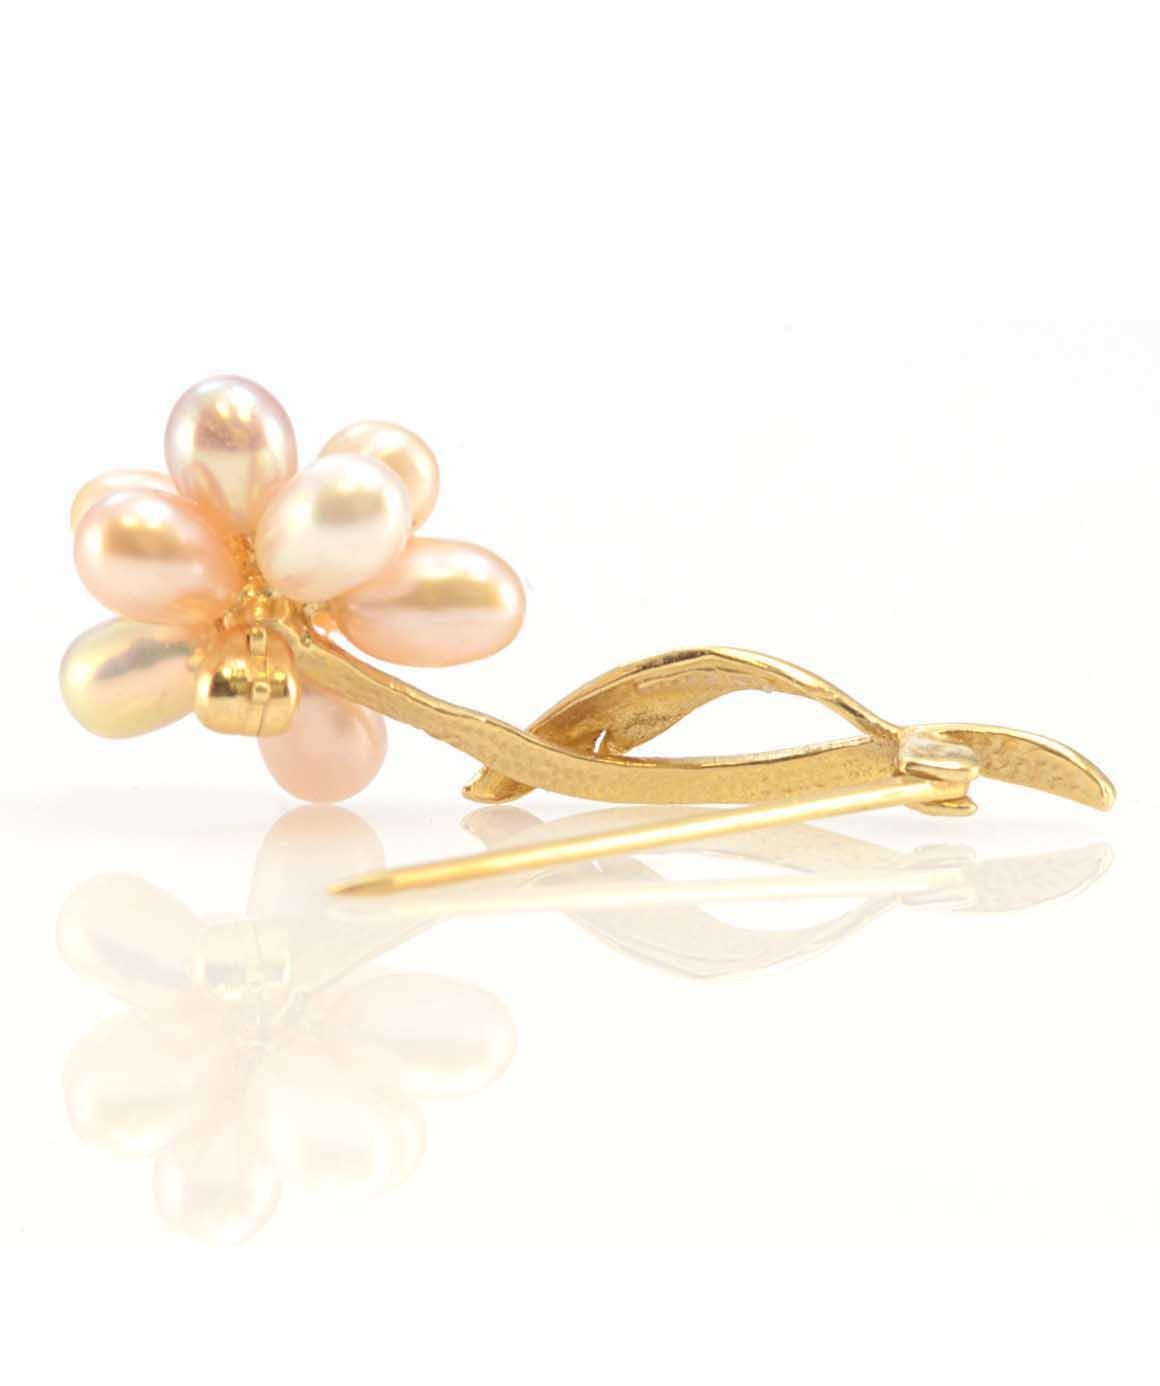 Solid 14K Yellow Gold Pearl & Diamond Flower Pin 2.5g 
Excellent condition. This solid 14k yellow gold flower pin features ten oval pearls that form a flower shape with a genuine diamond in the middle weighing about 0.005ct. The pin measures about